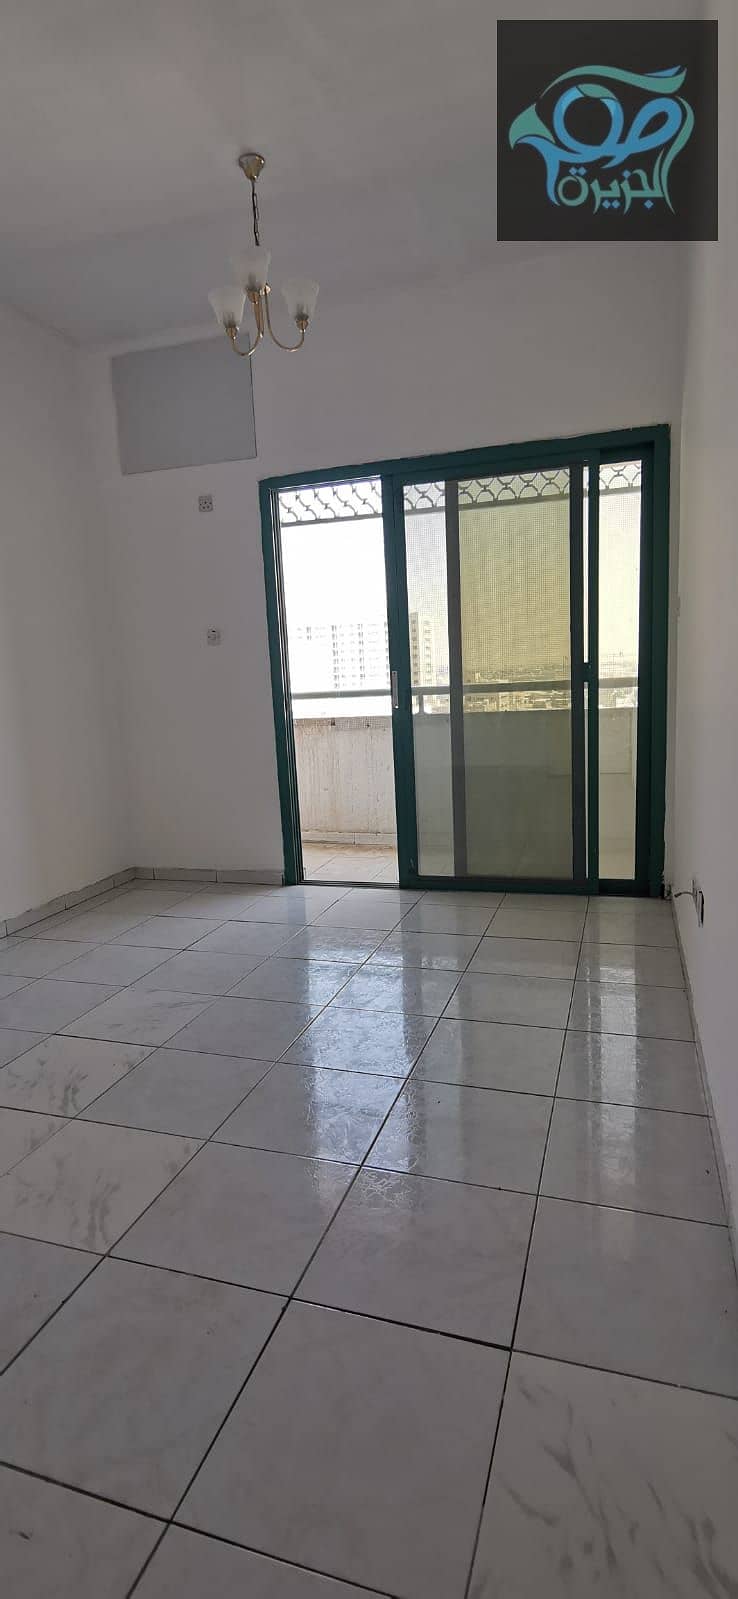 For rent two rooms and a hall in the Qasimia area